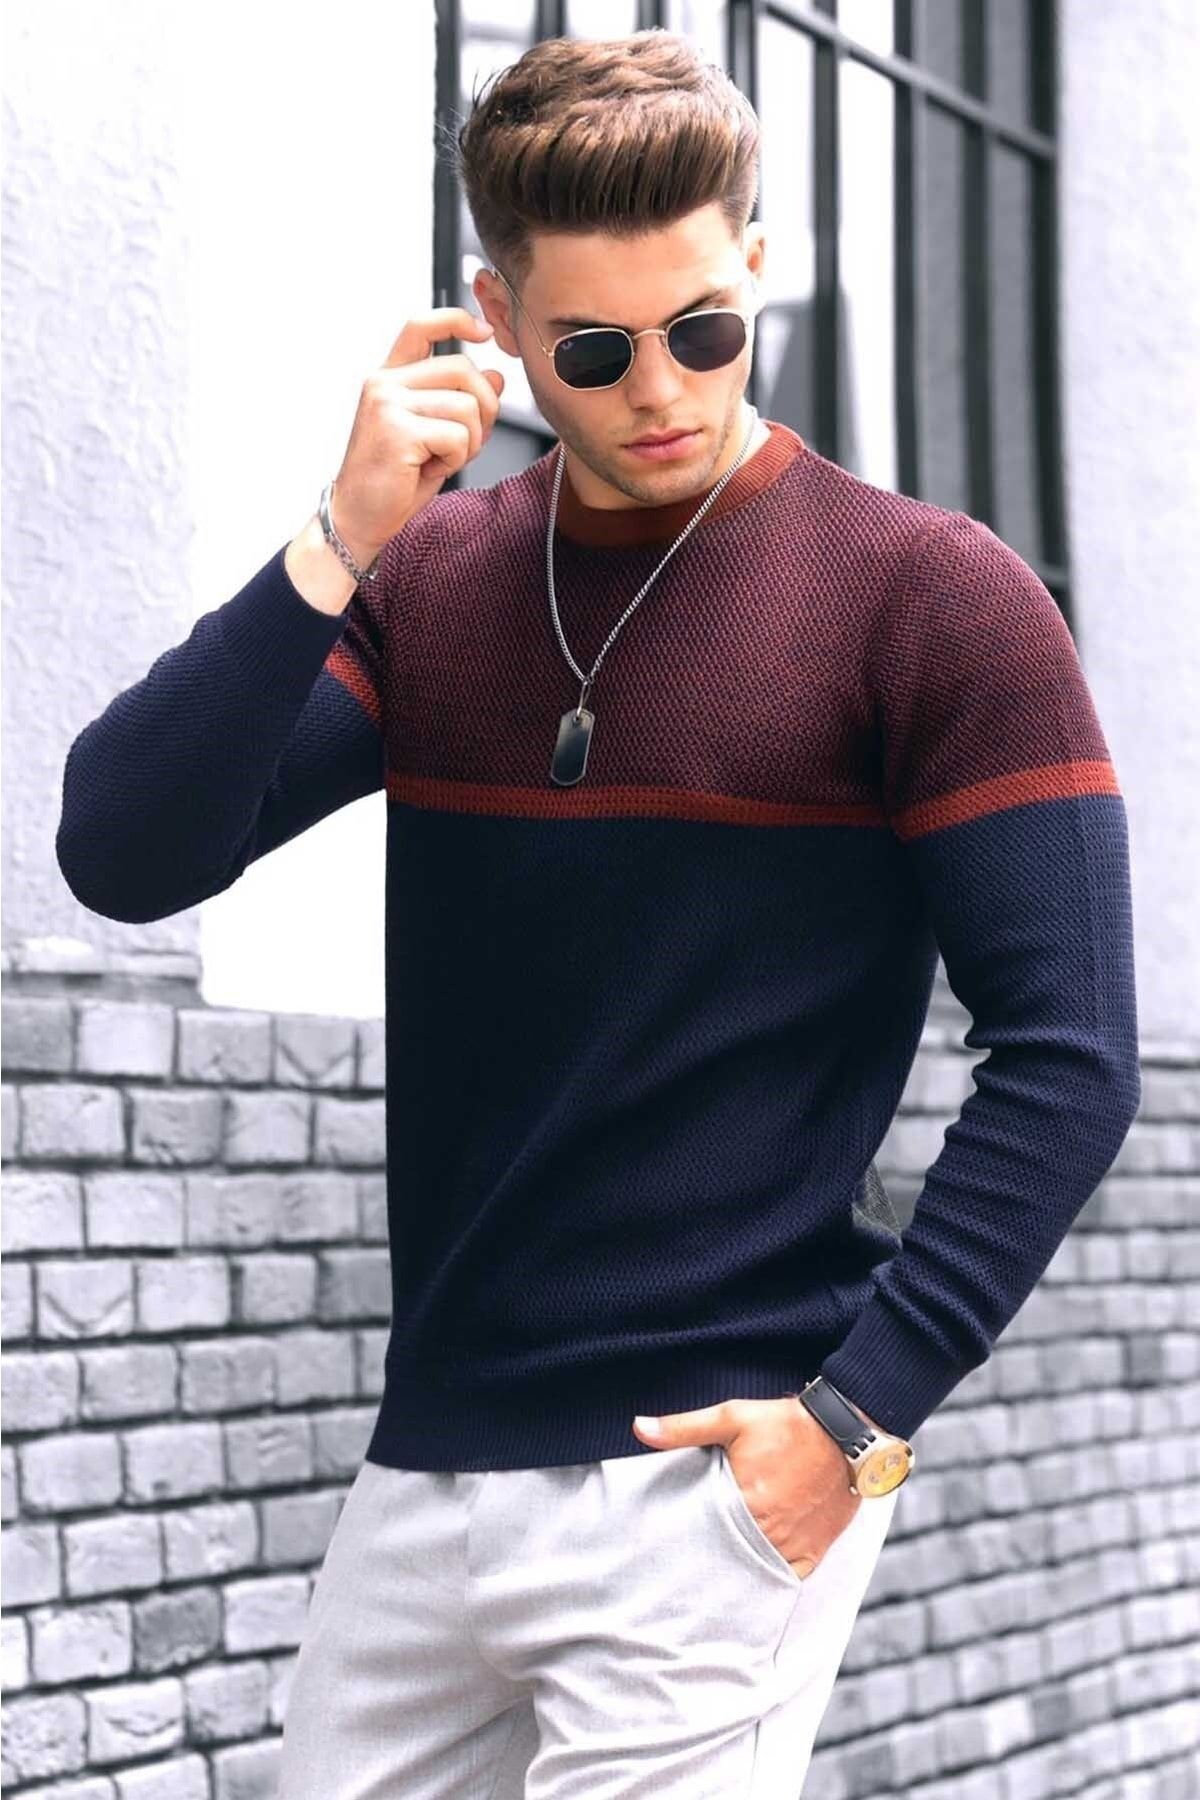 Burgundy Crew-neck Sweater with Navy Pants Outfits For Men (85 ideas &  outfits) | Lookastic